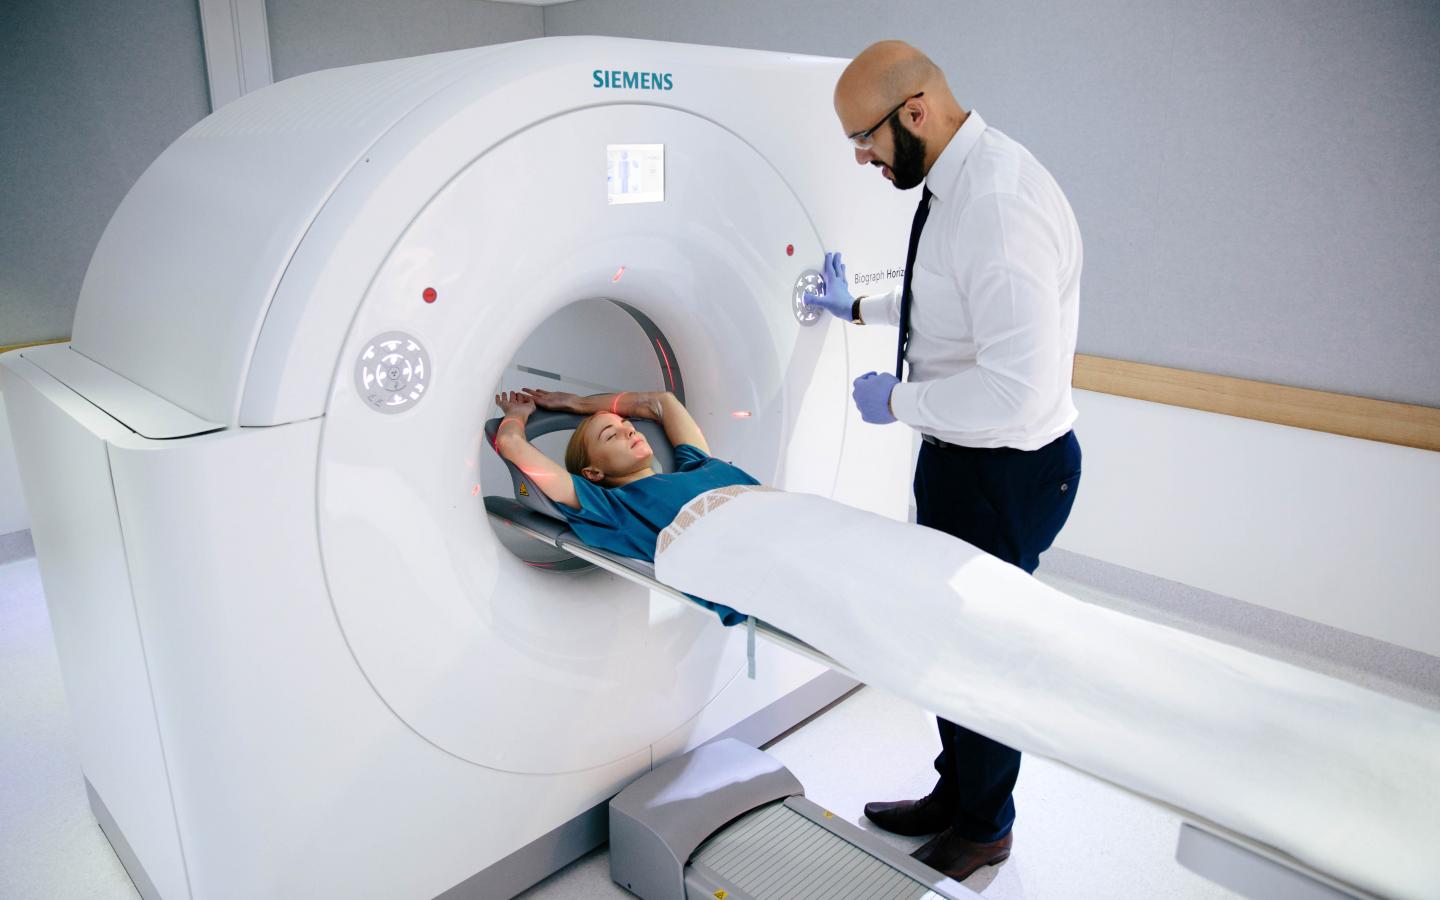 Large-bore PET-CT Scanner at the Centre for Advanced Imaging